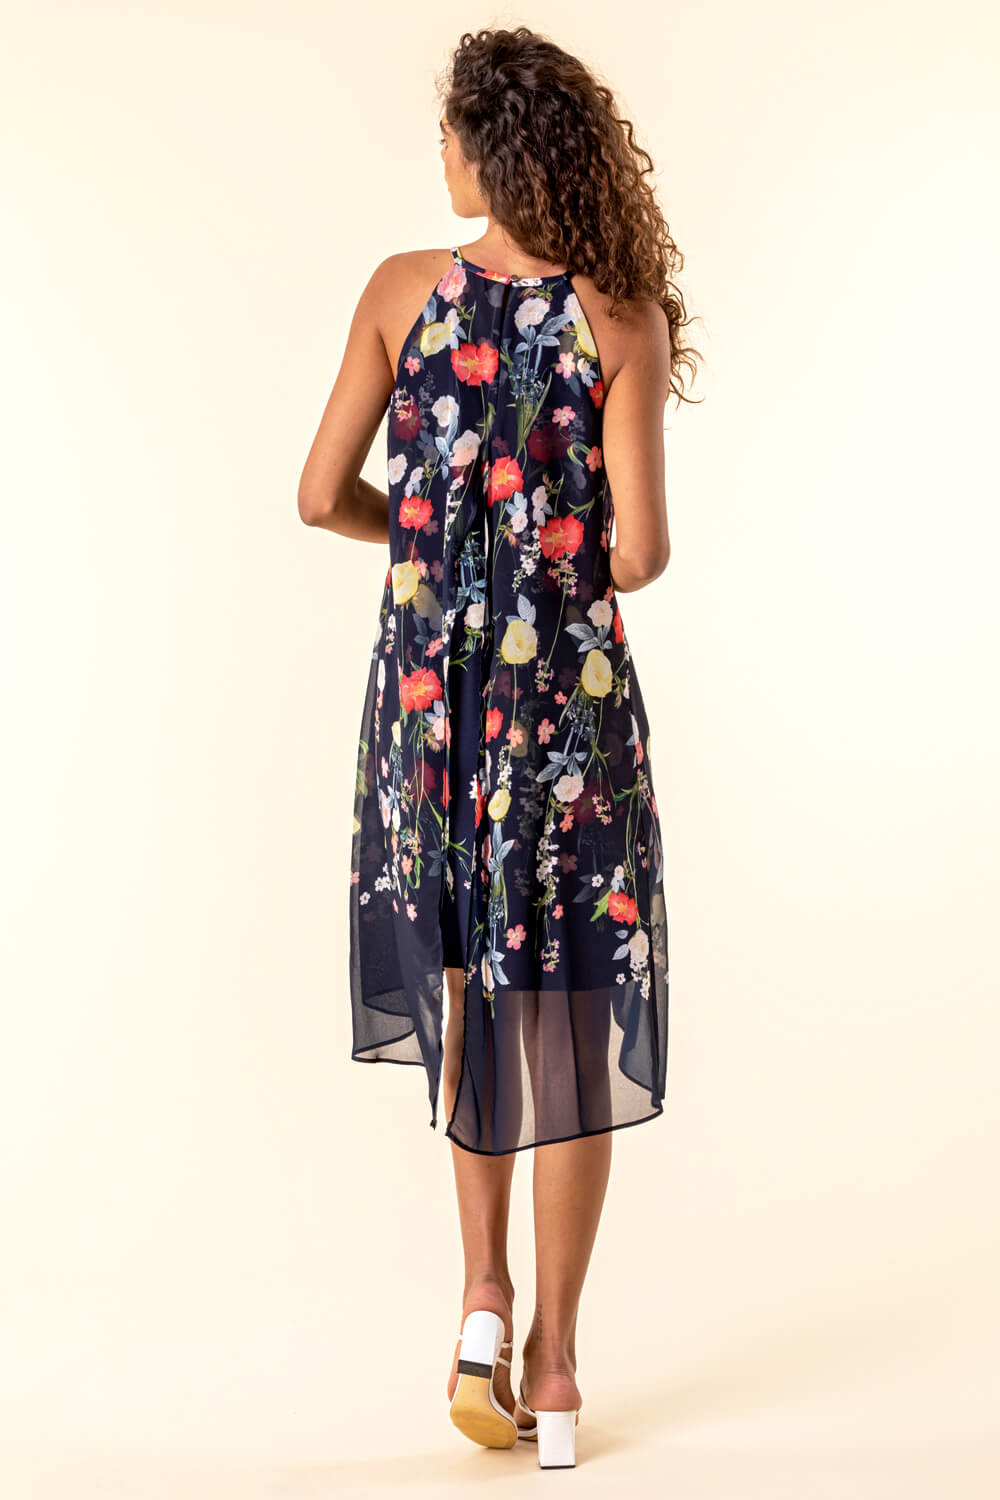 Navy  Floral Chiffon Overlay Dress, Image 2 of 4